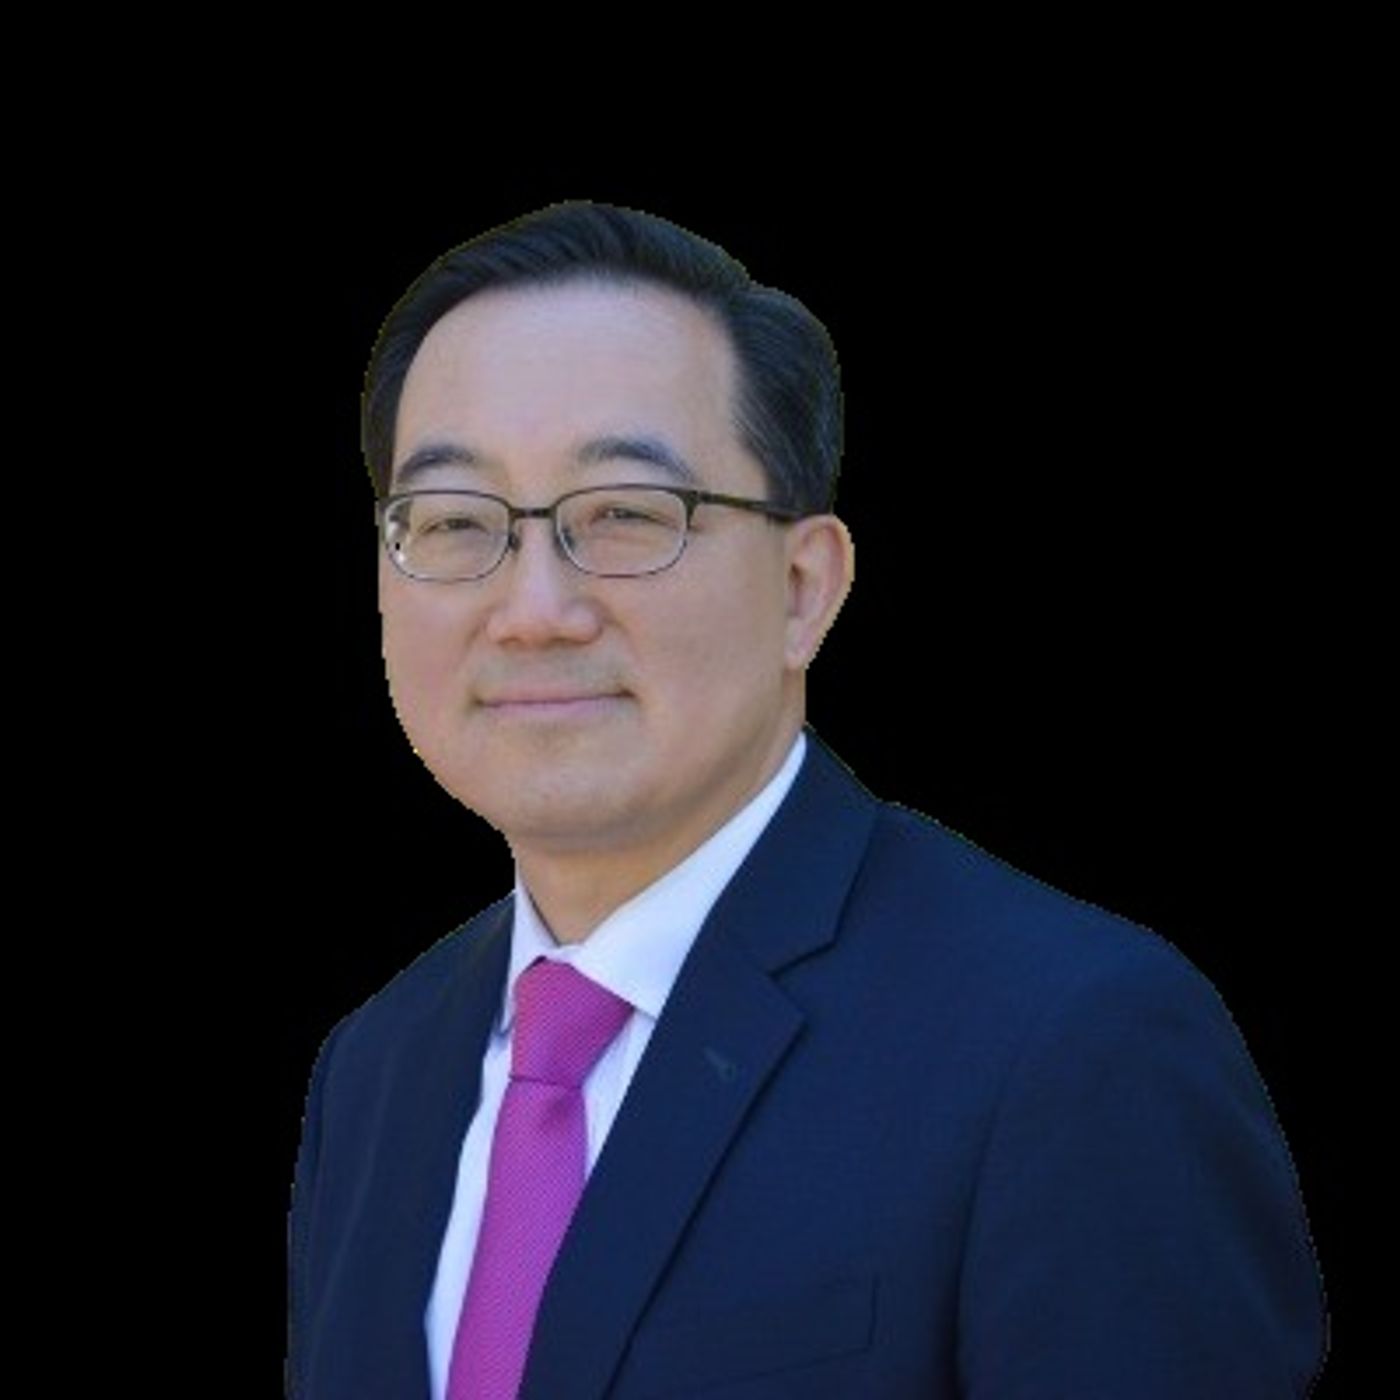 Interview With Stephen Ng, CLU, ChFC, CEP Founder of Stephen Ng Financial Group Discussing How to Grow & Protect Retirement Wealth